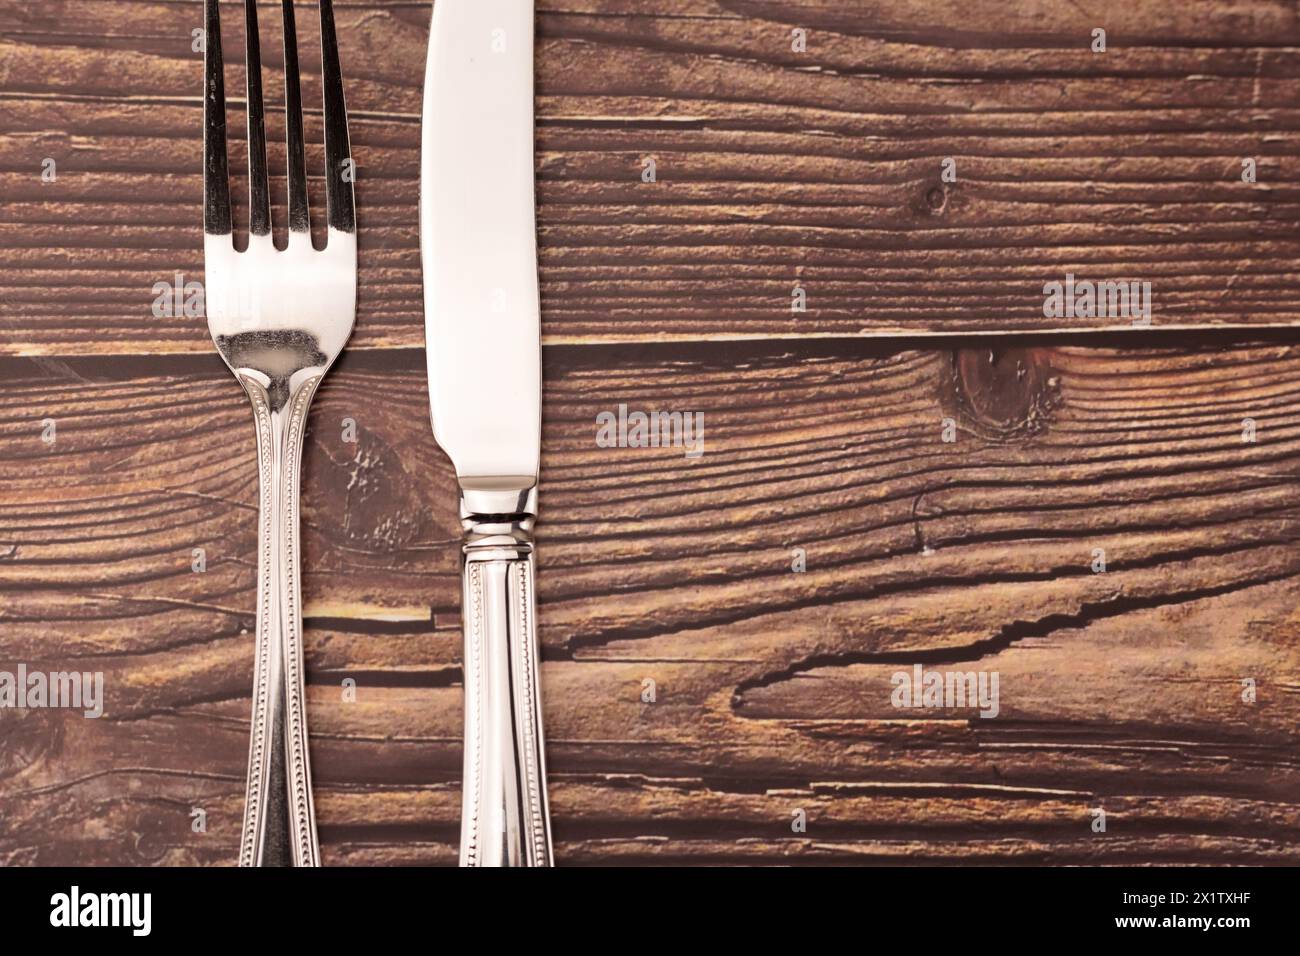 Knife and fork against rustic wood table background with copy space for use as background to menu or similar. Stock Photo